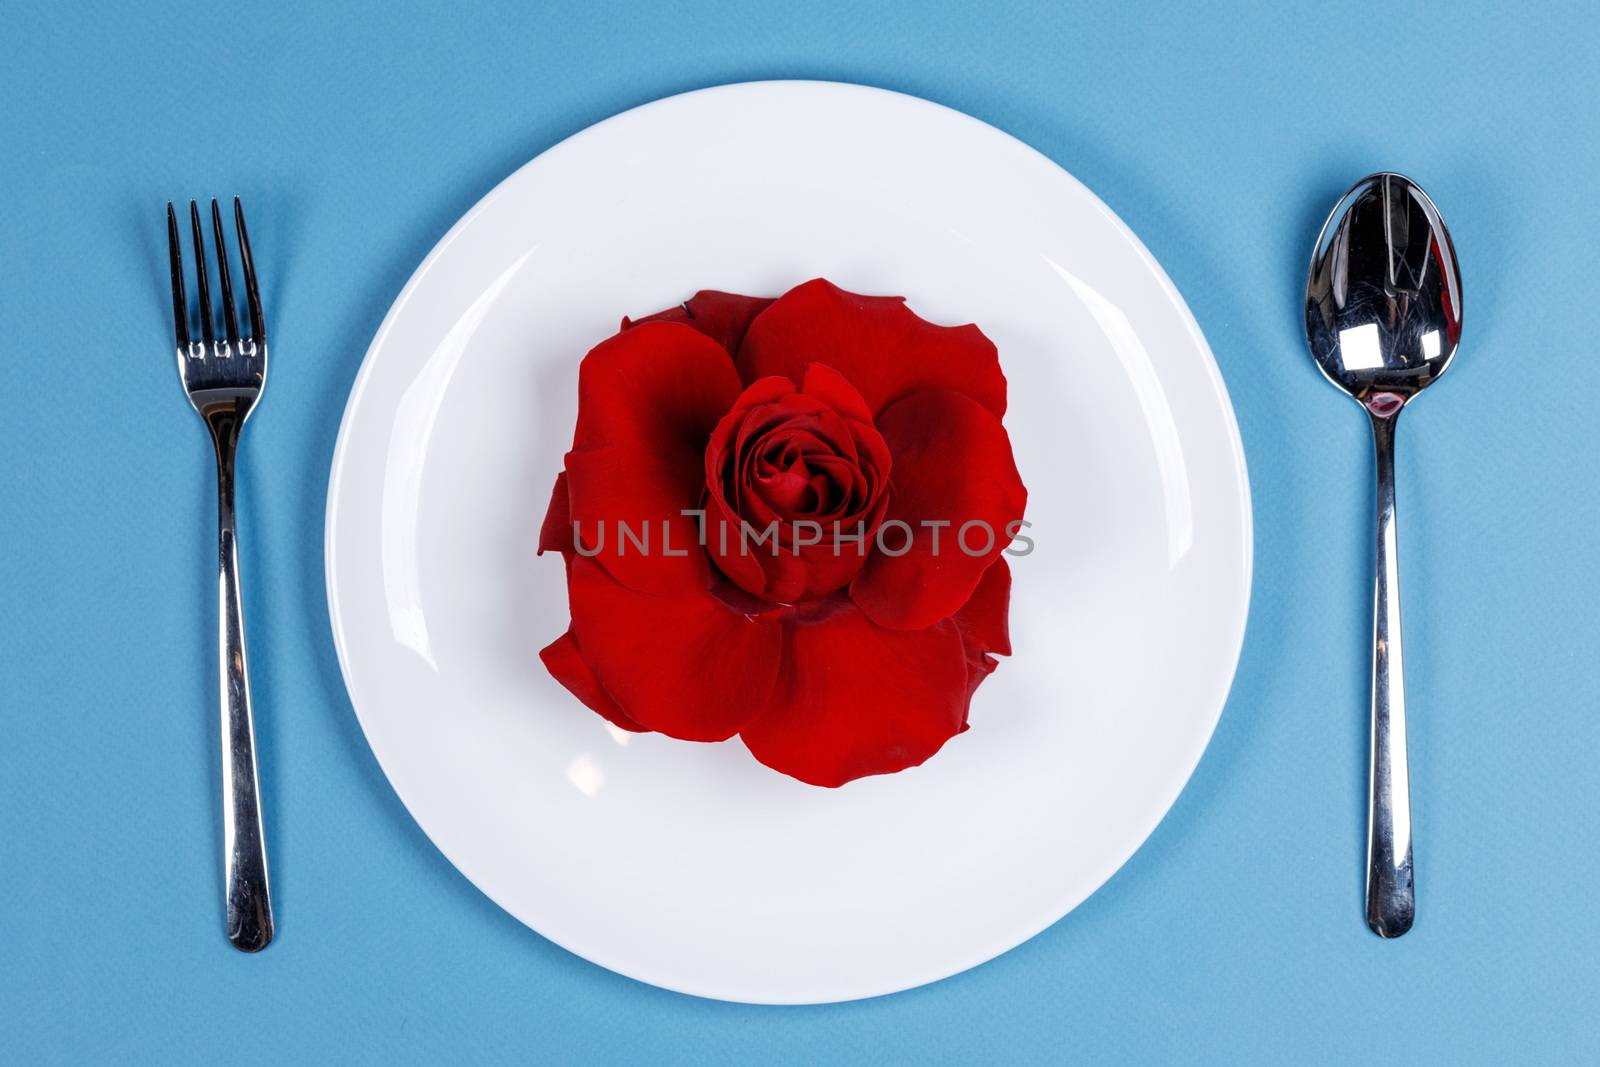 Cutlery set plate rose flower on blue background Valentine day romantic dinner concept